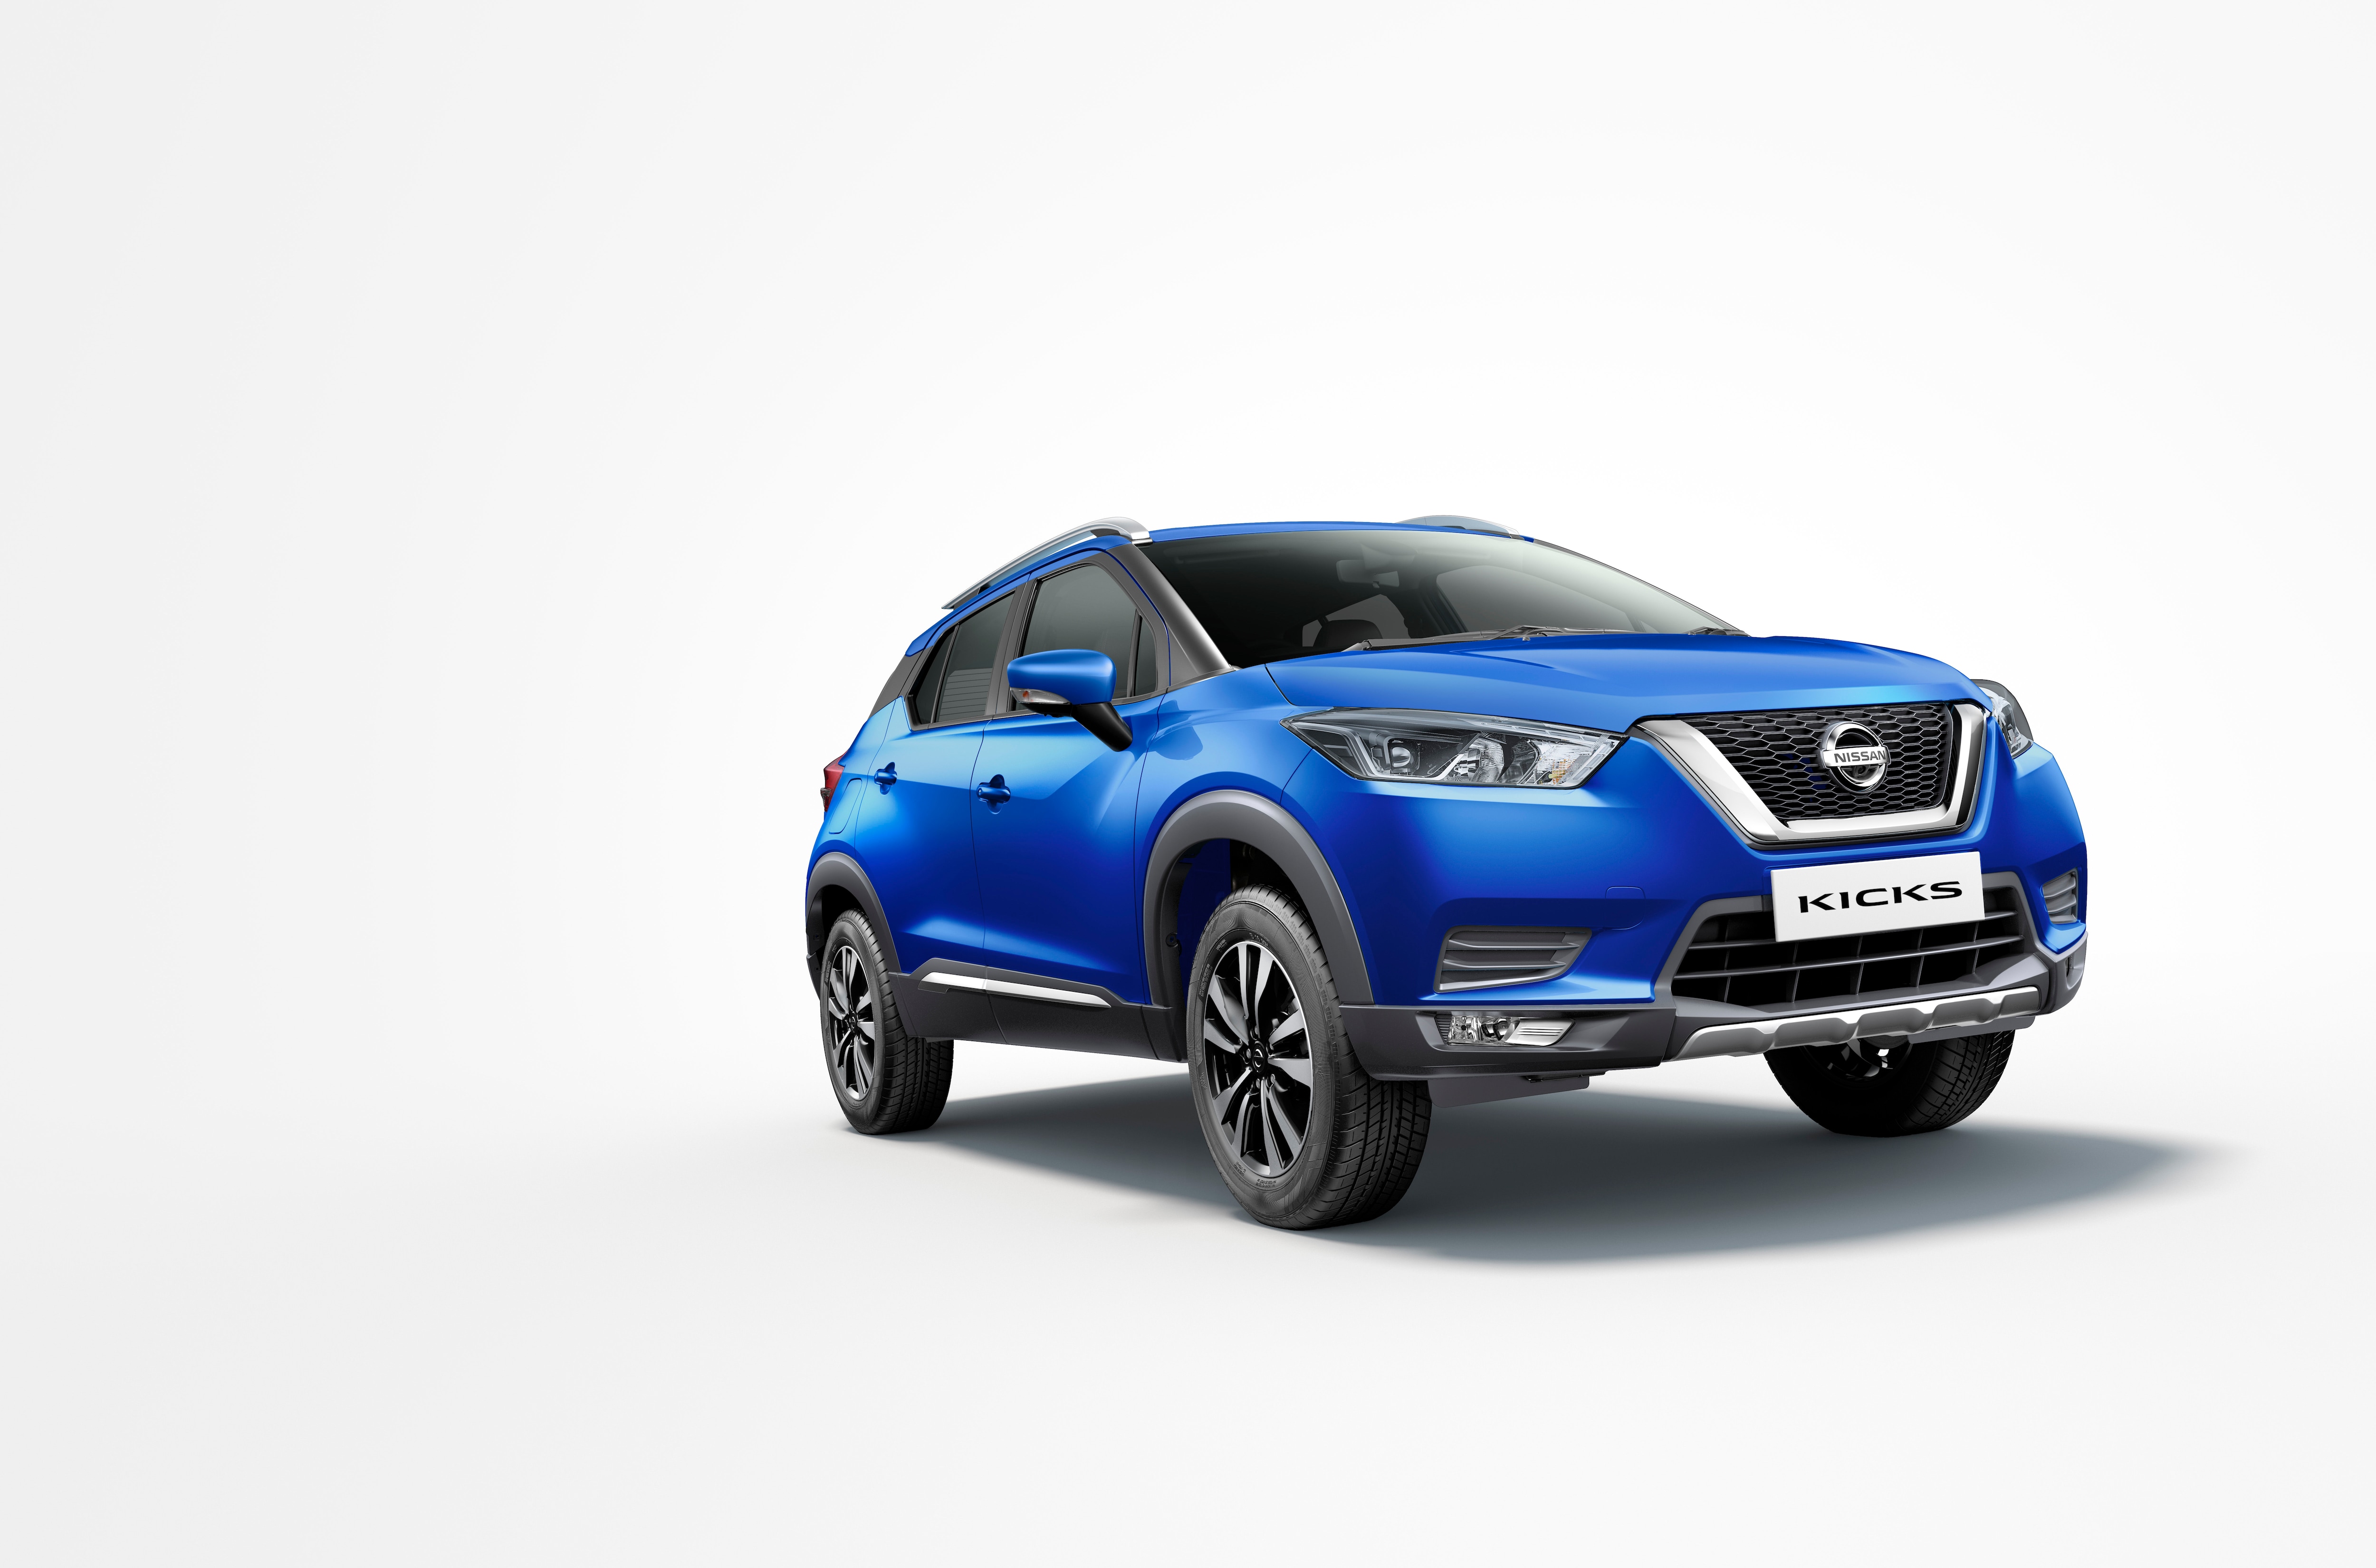 Nissan Kicks received its most-recent set of updates in 2020.